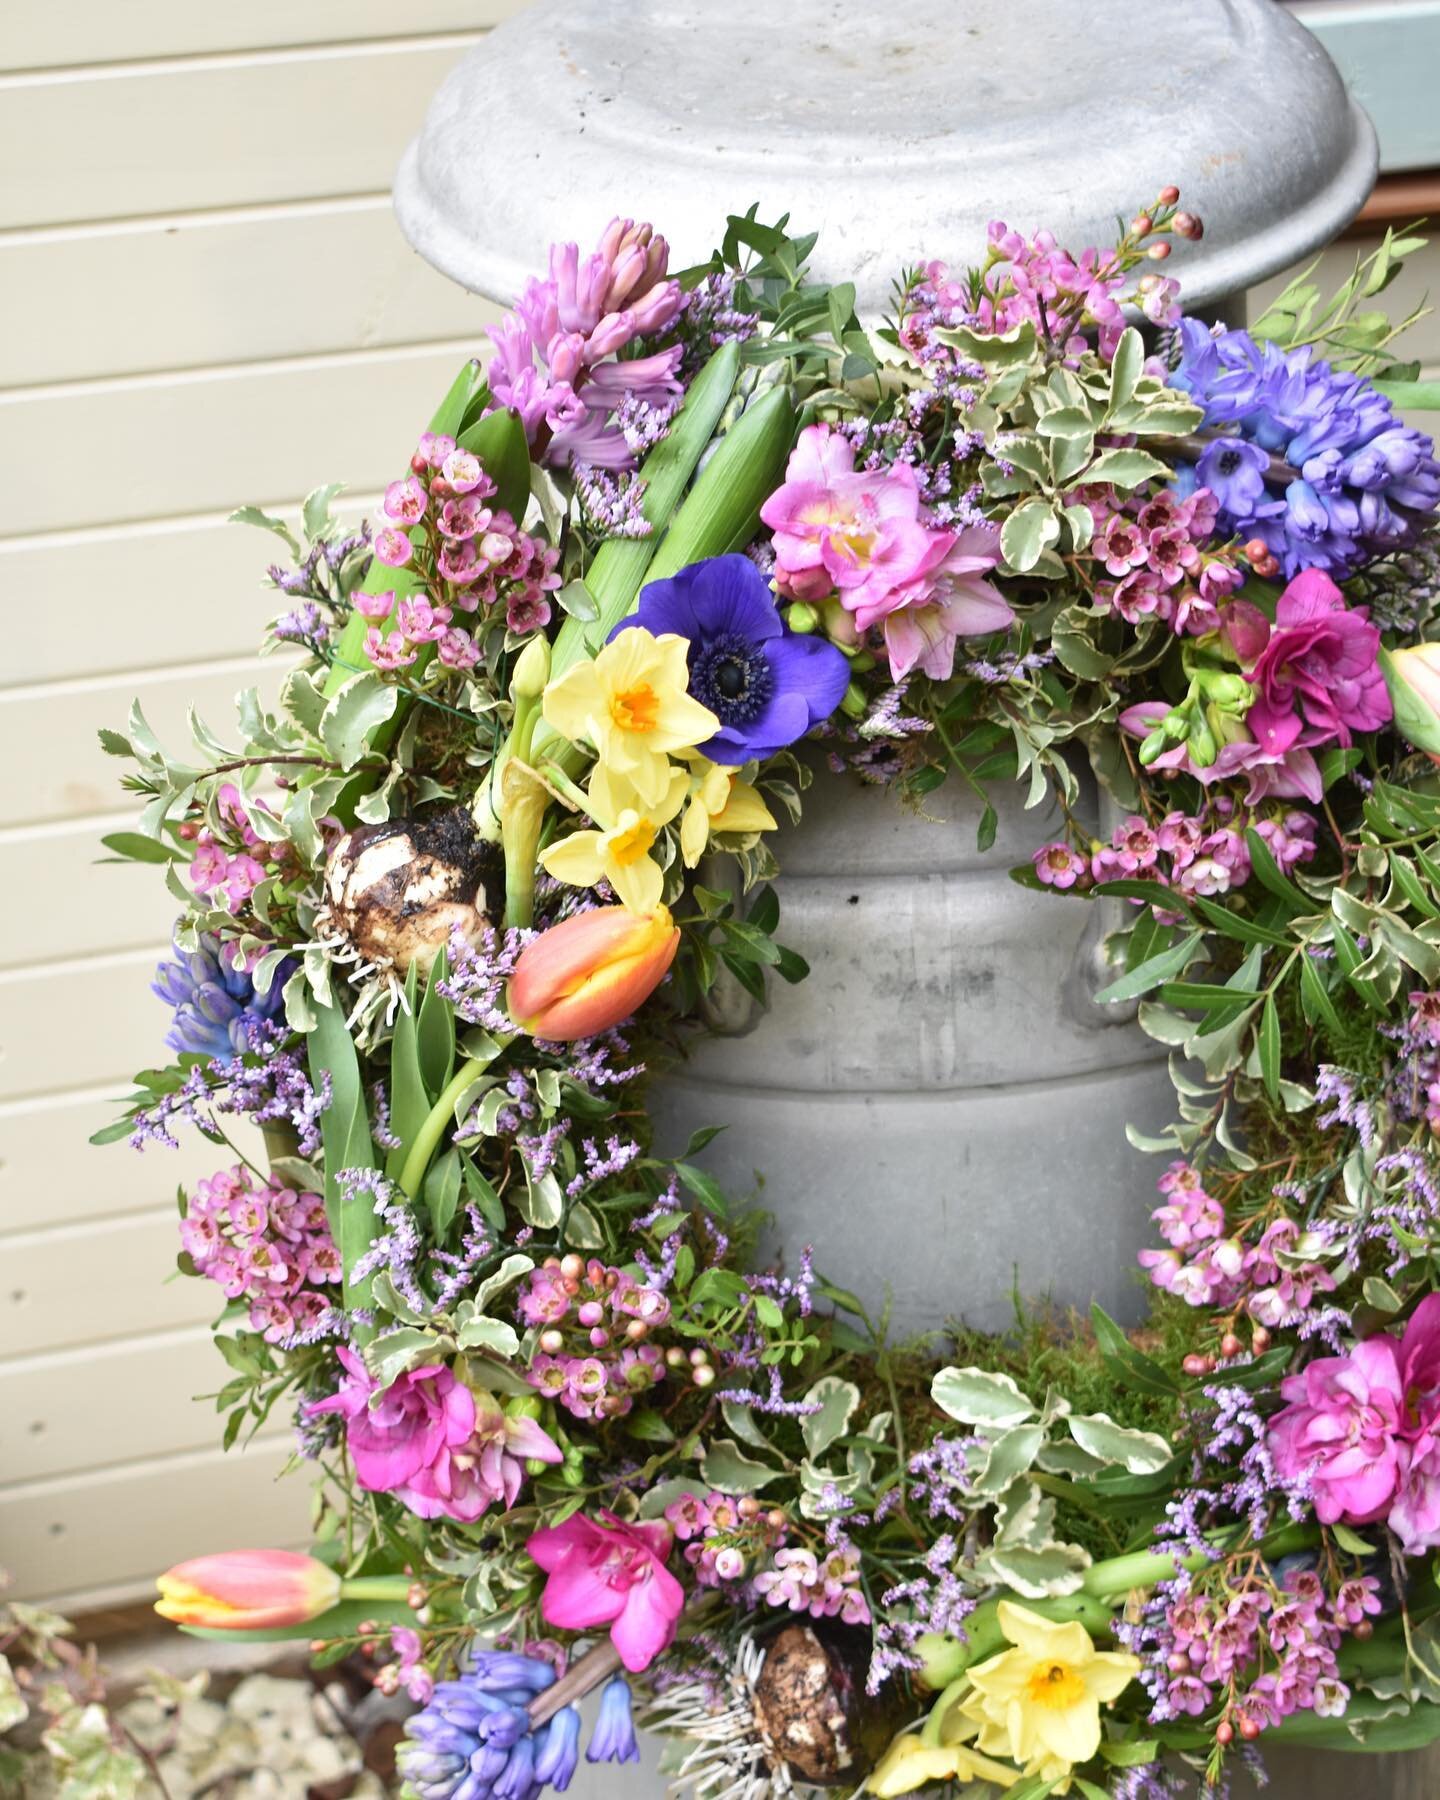 On Sunday 16 April 10am-1pm join us at Cambridge Art Makers to make your very own Eco-Spring wreath - on a willow base - to be used on your door or as a table feature.  I will show you all the simple techniques required to create a stunning wreath 🌿